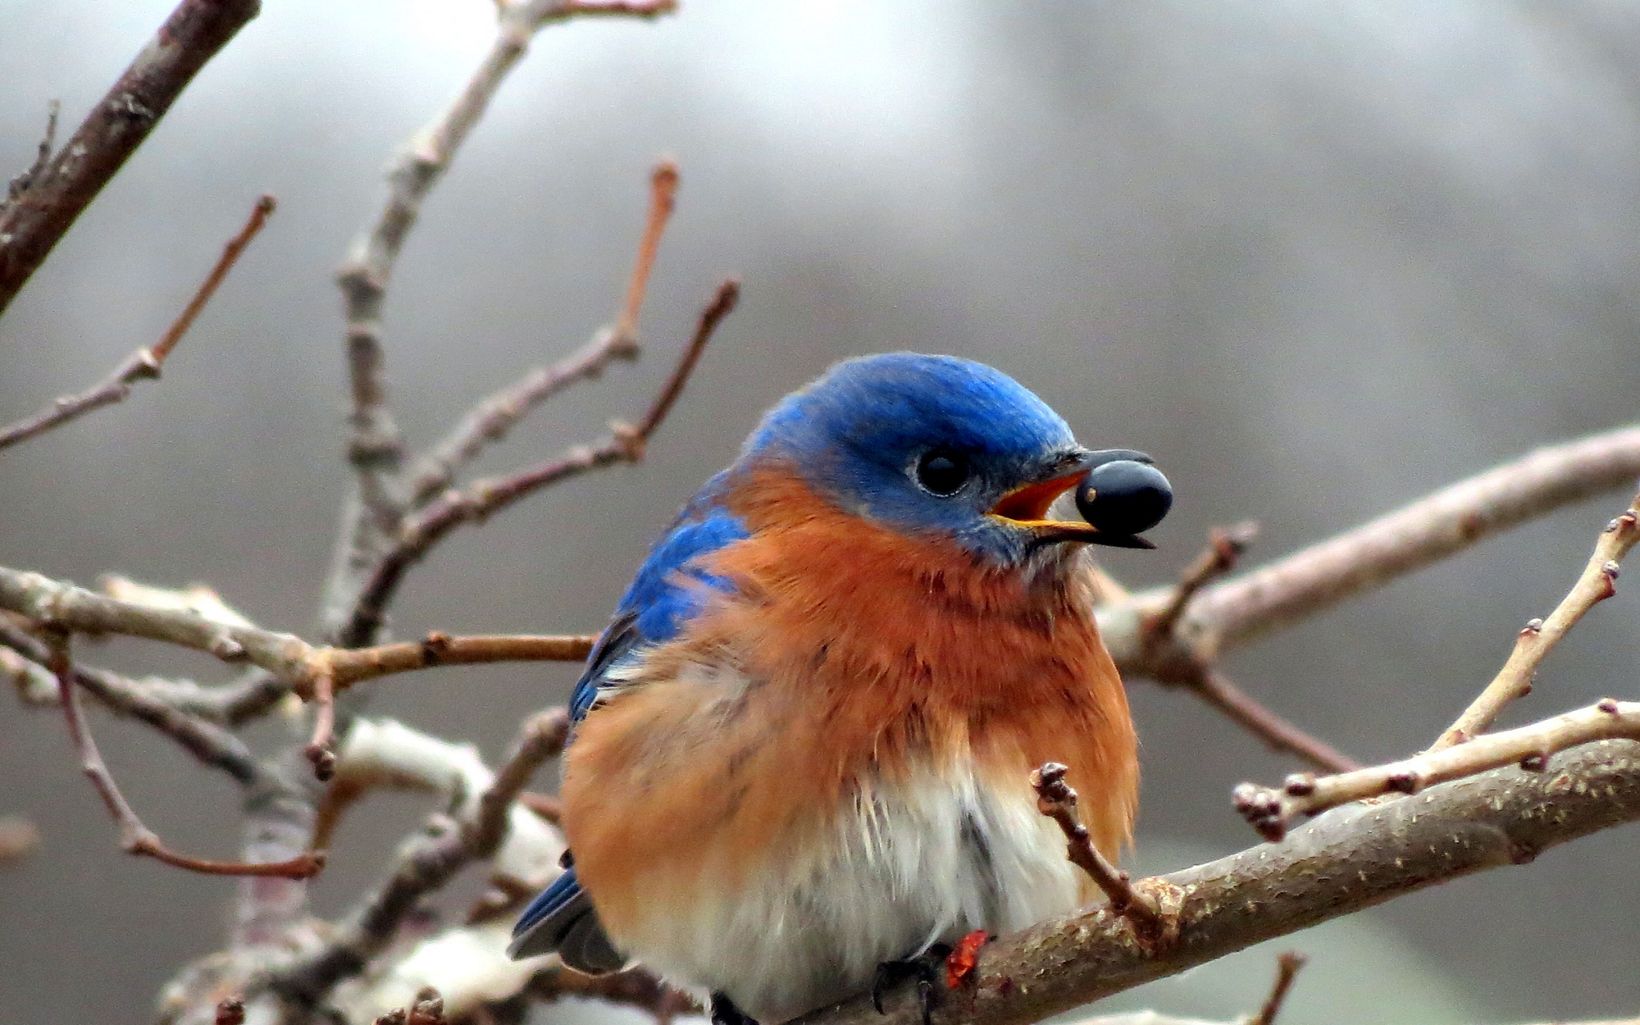 A bluebird holds a blueberry in its mouth.